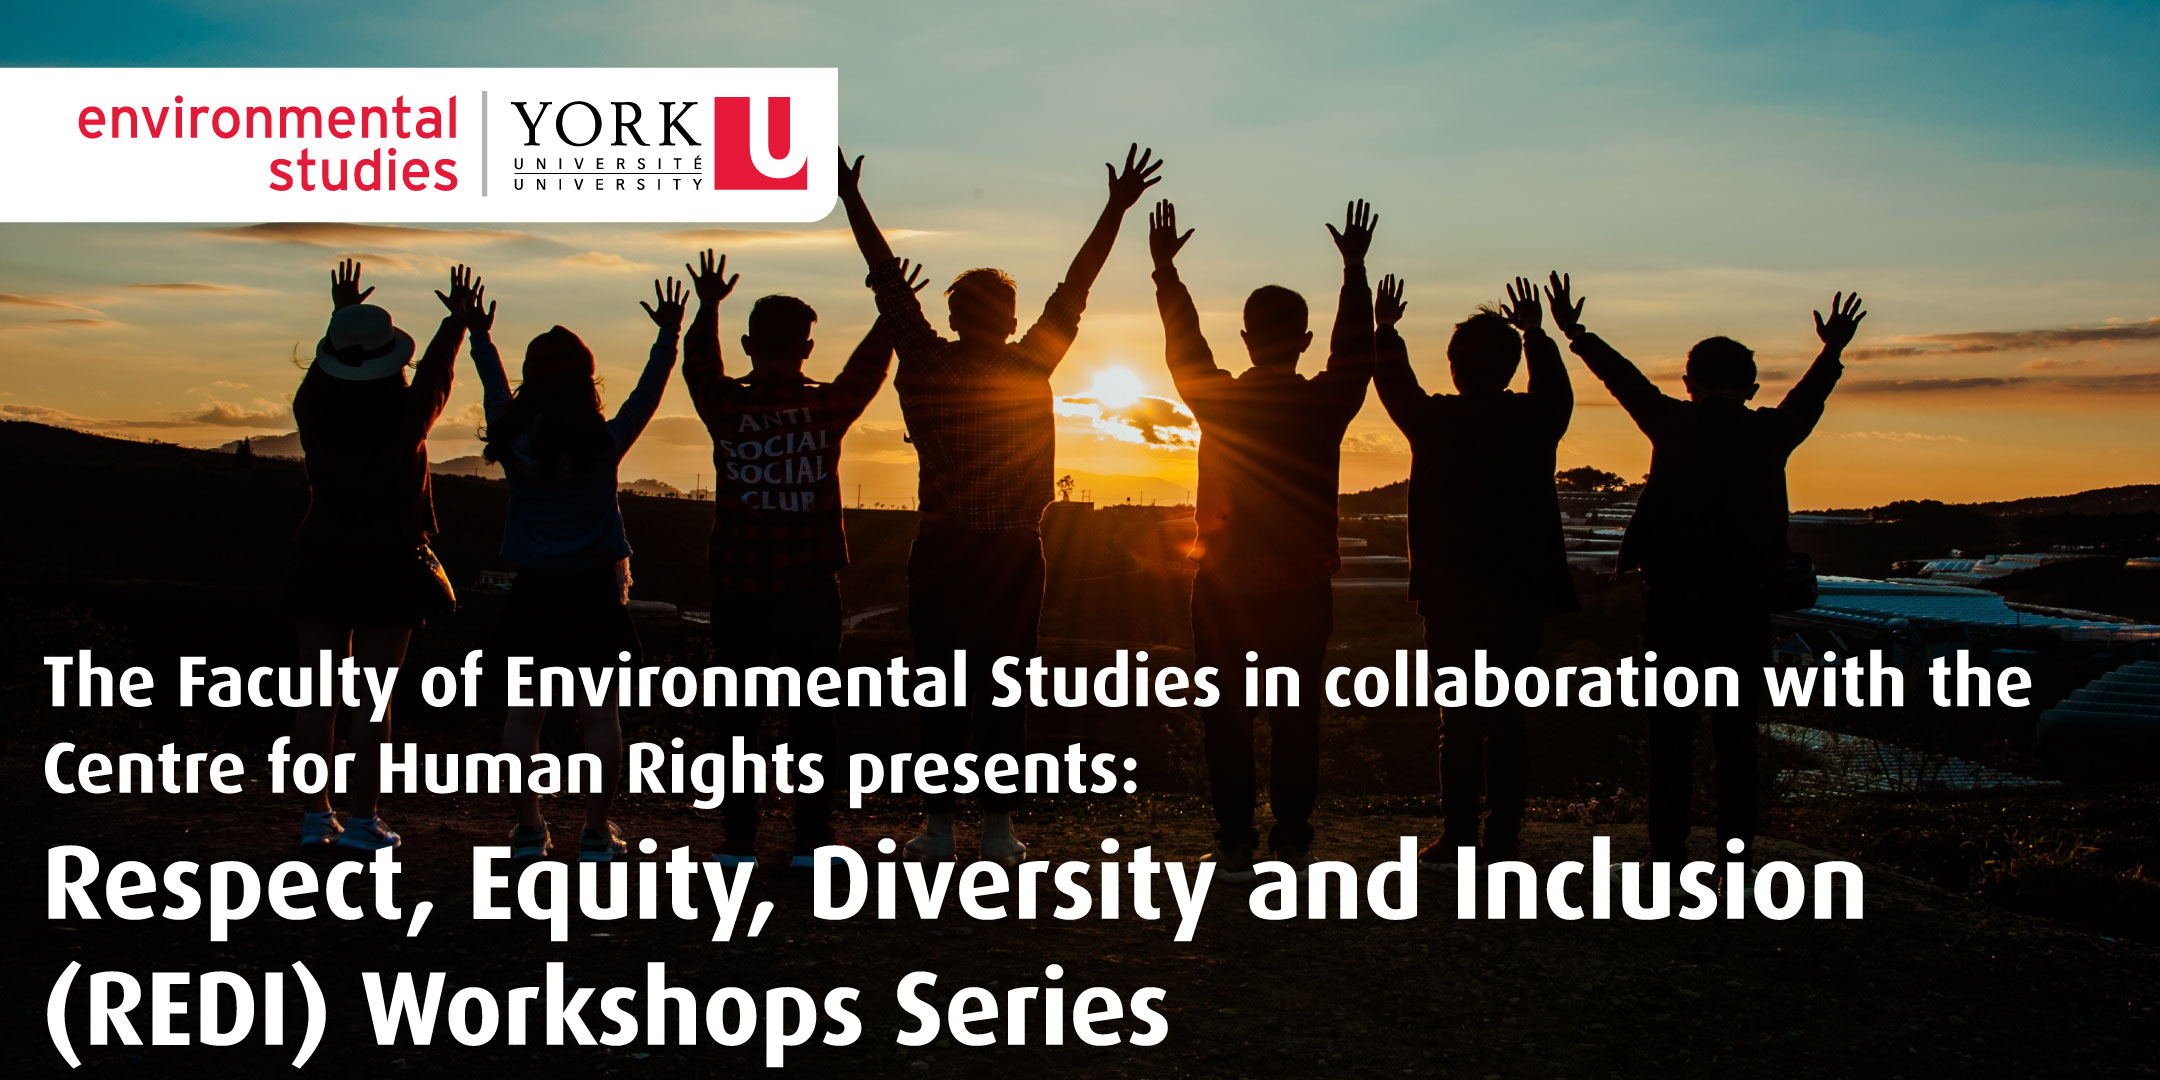 Respect, Equity, Diversity and Inclusion (REDI) workshops series